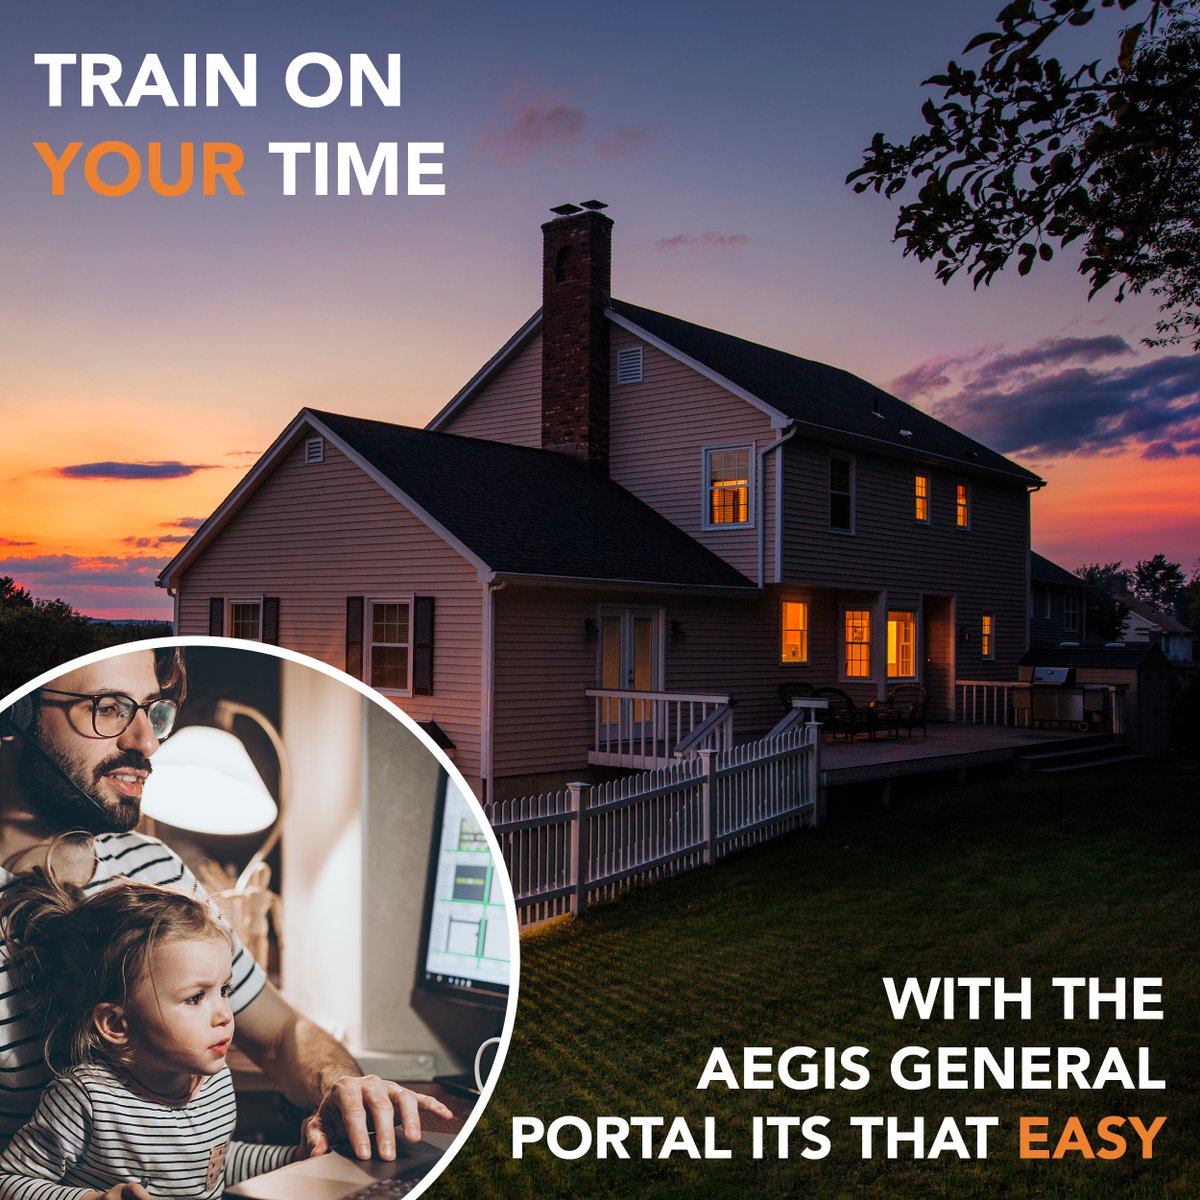 With our user-friendly portal, Aegis General makes it possible to train, quote, and bind policies anytime, anywhere. Check out our training materials, available 24/7, here: conta.cc/3pAxtXT #AegisNation #LearnAnytimeAnywhere